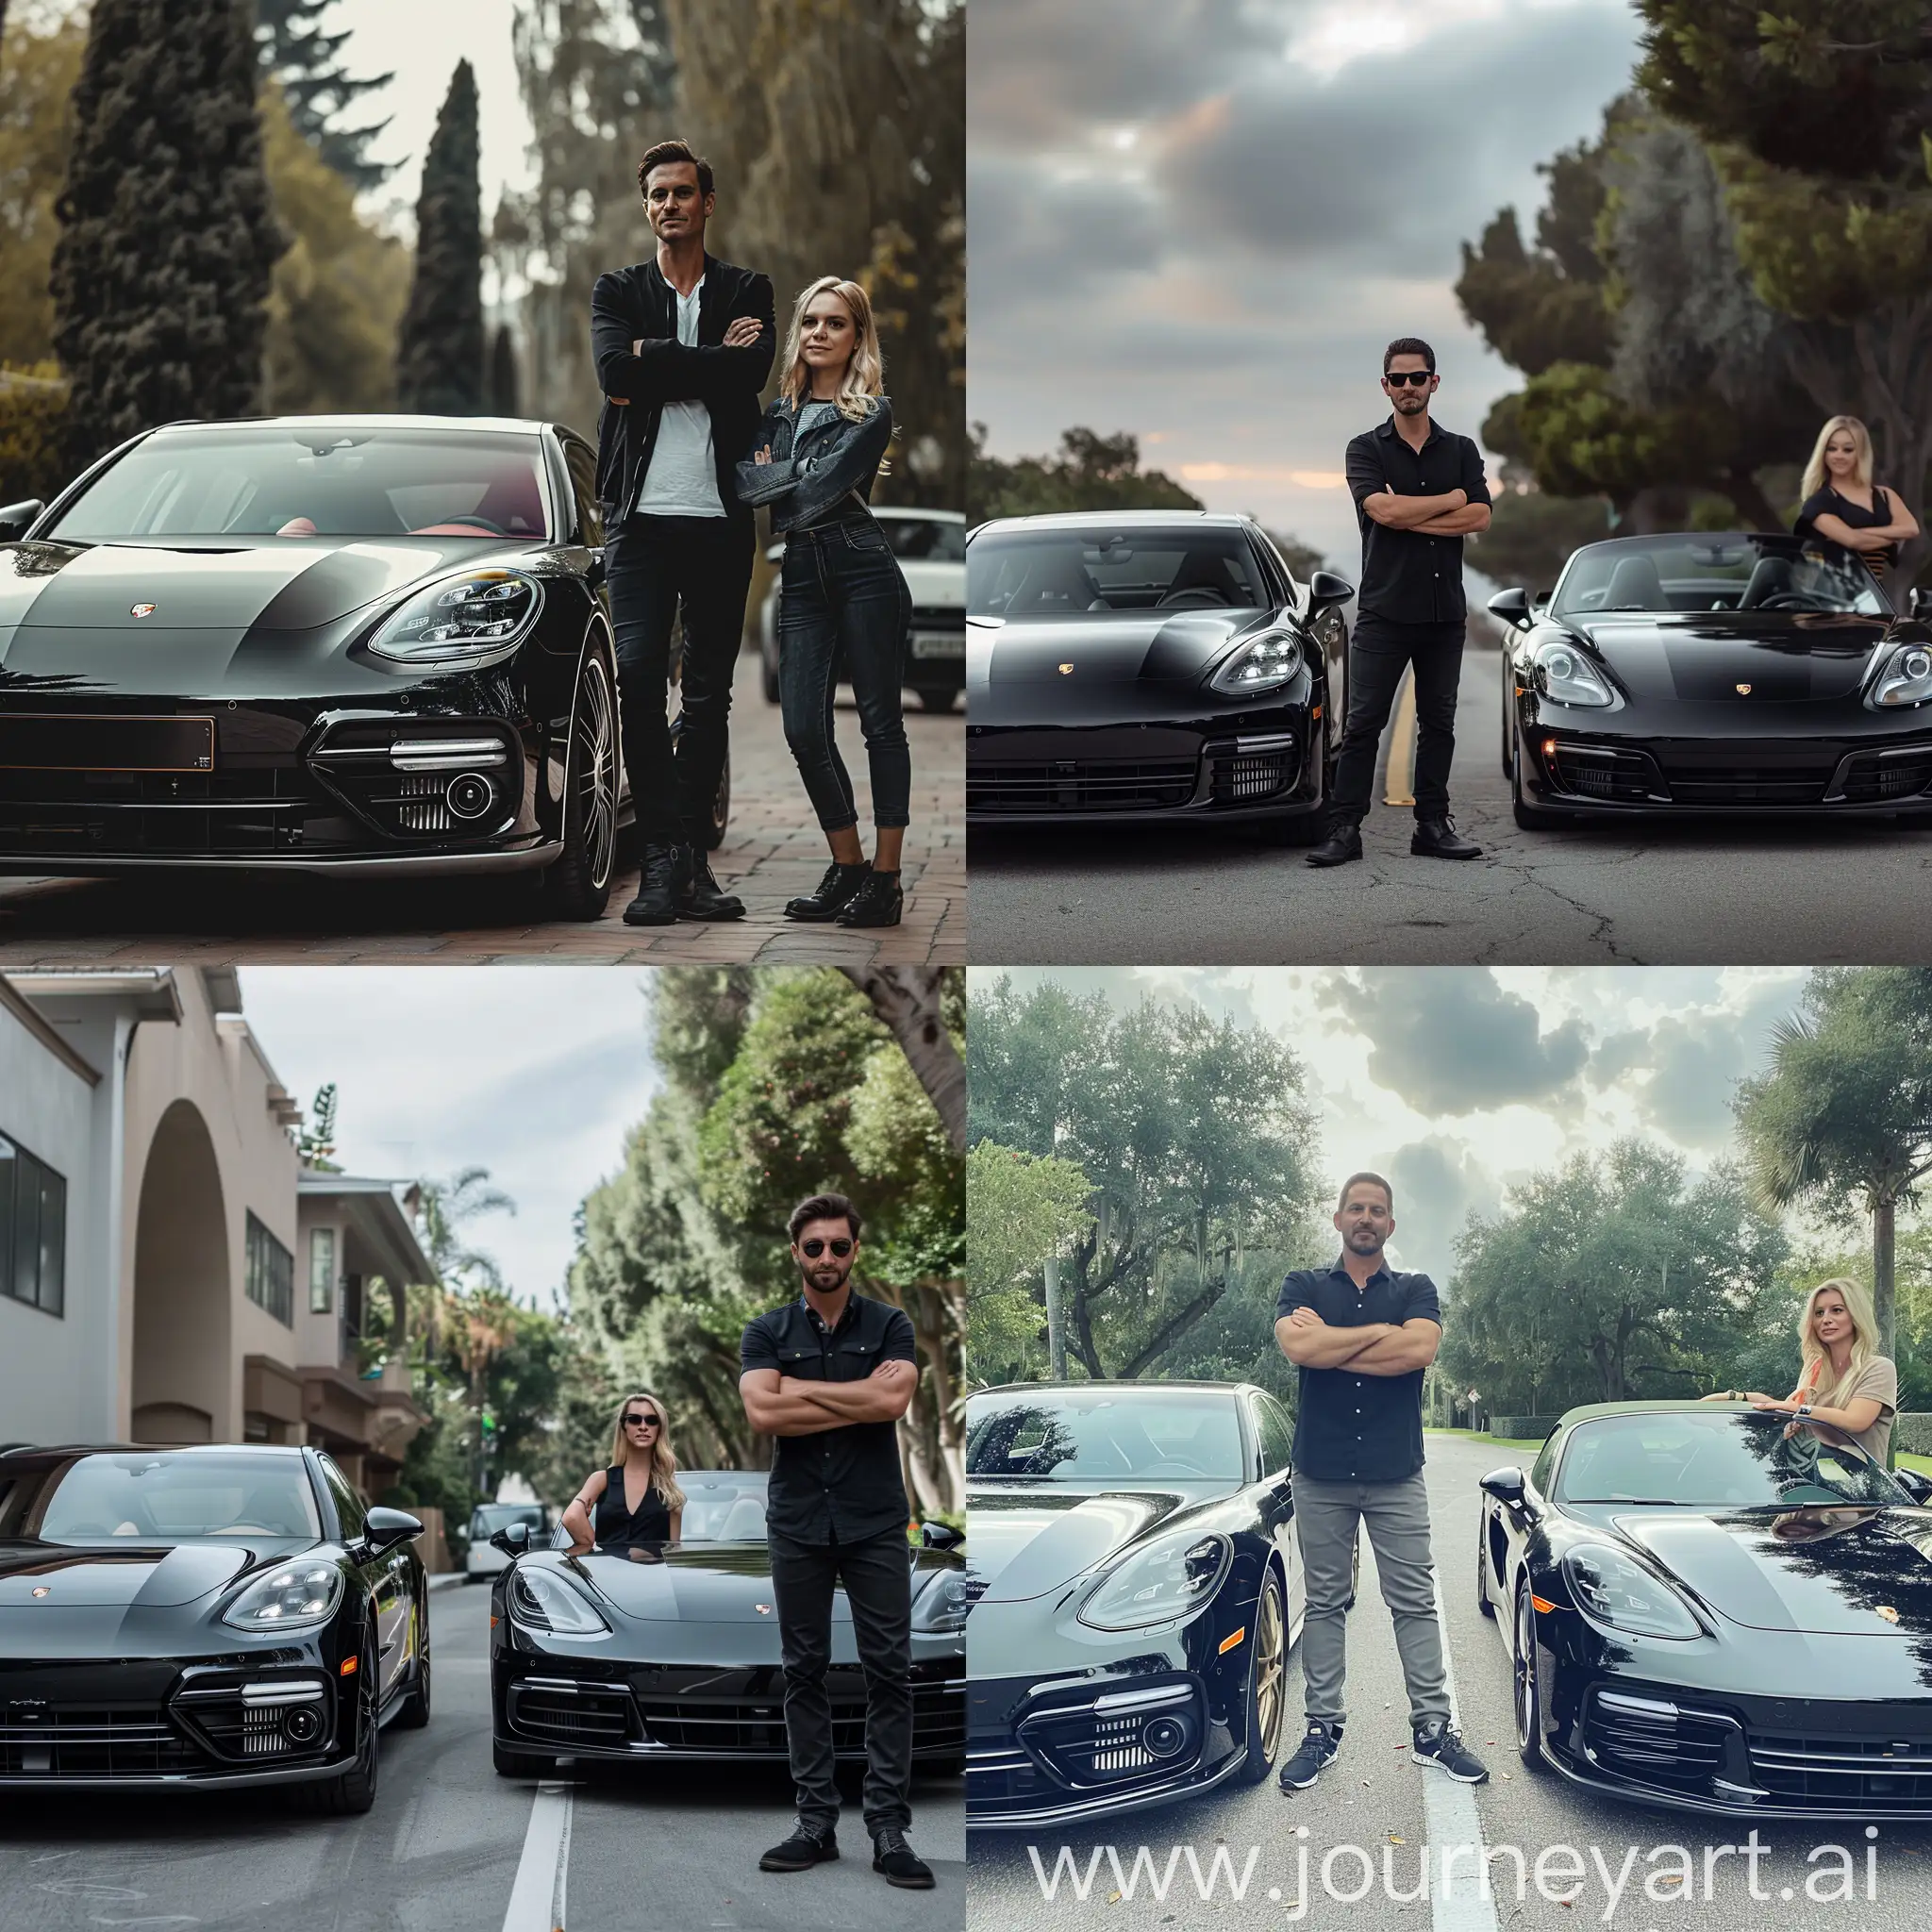 Chic-Couple-Poses-with-Sleek-Porsches-in-Stylish-Photo